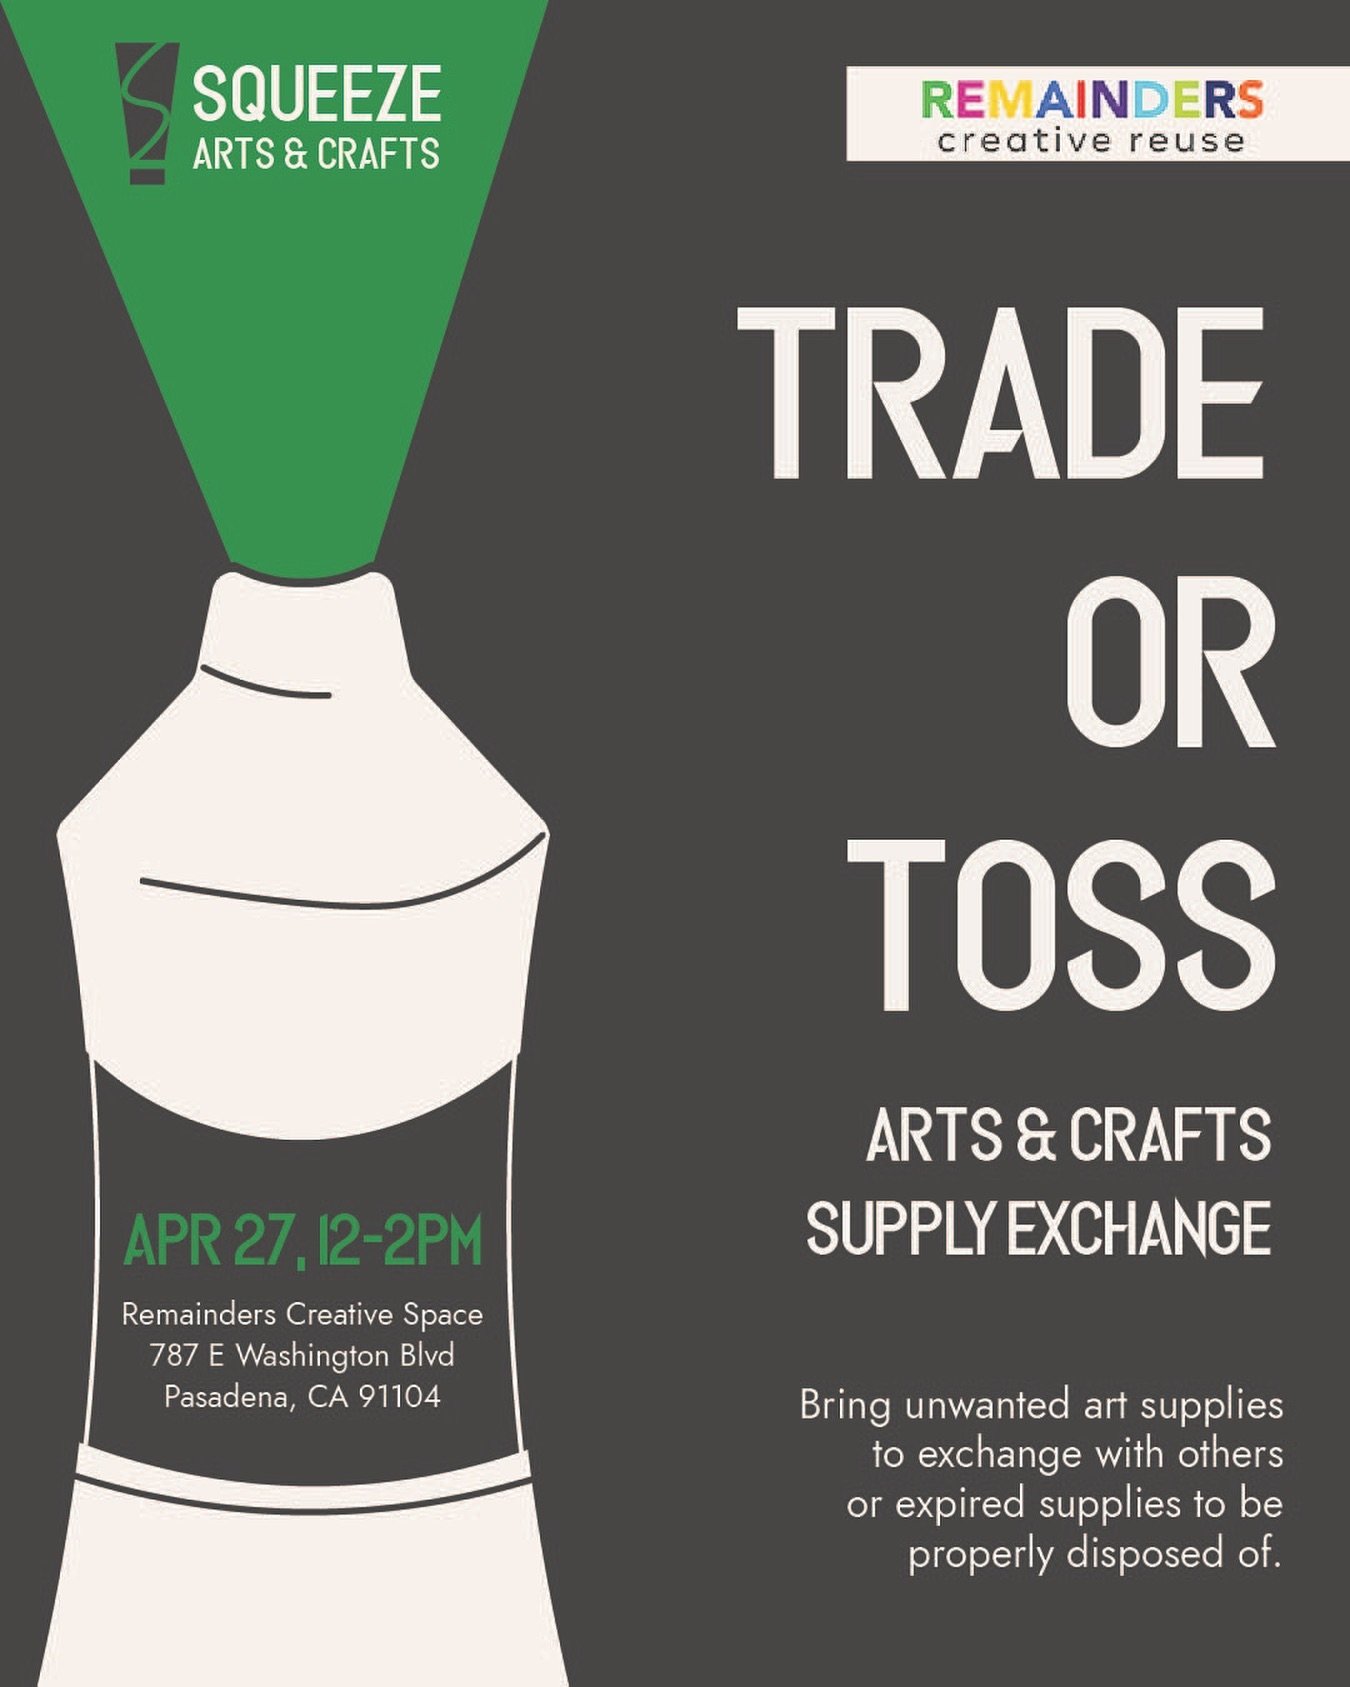 We&rsquo;re hosting another Trade and Toss event with @squeezeartsandcrafts on Saturday April 27th! Bring unwanted art supplies to exchange with others or expired supplies to be properly disposed of. We&rsquo;d like to thank Squeeze Arts &amp; Crafts